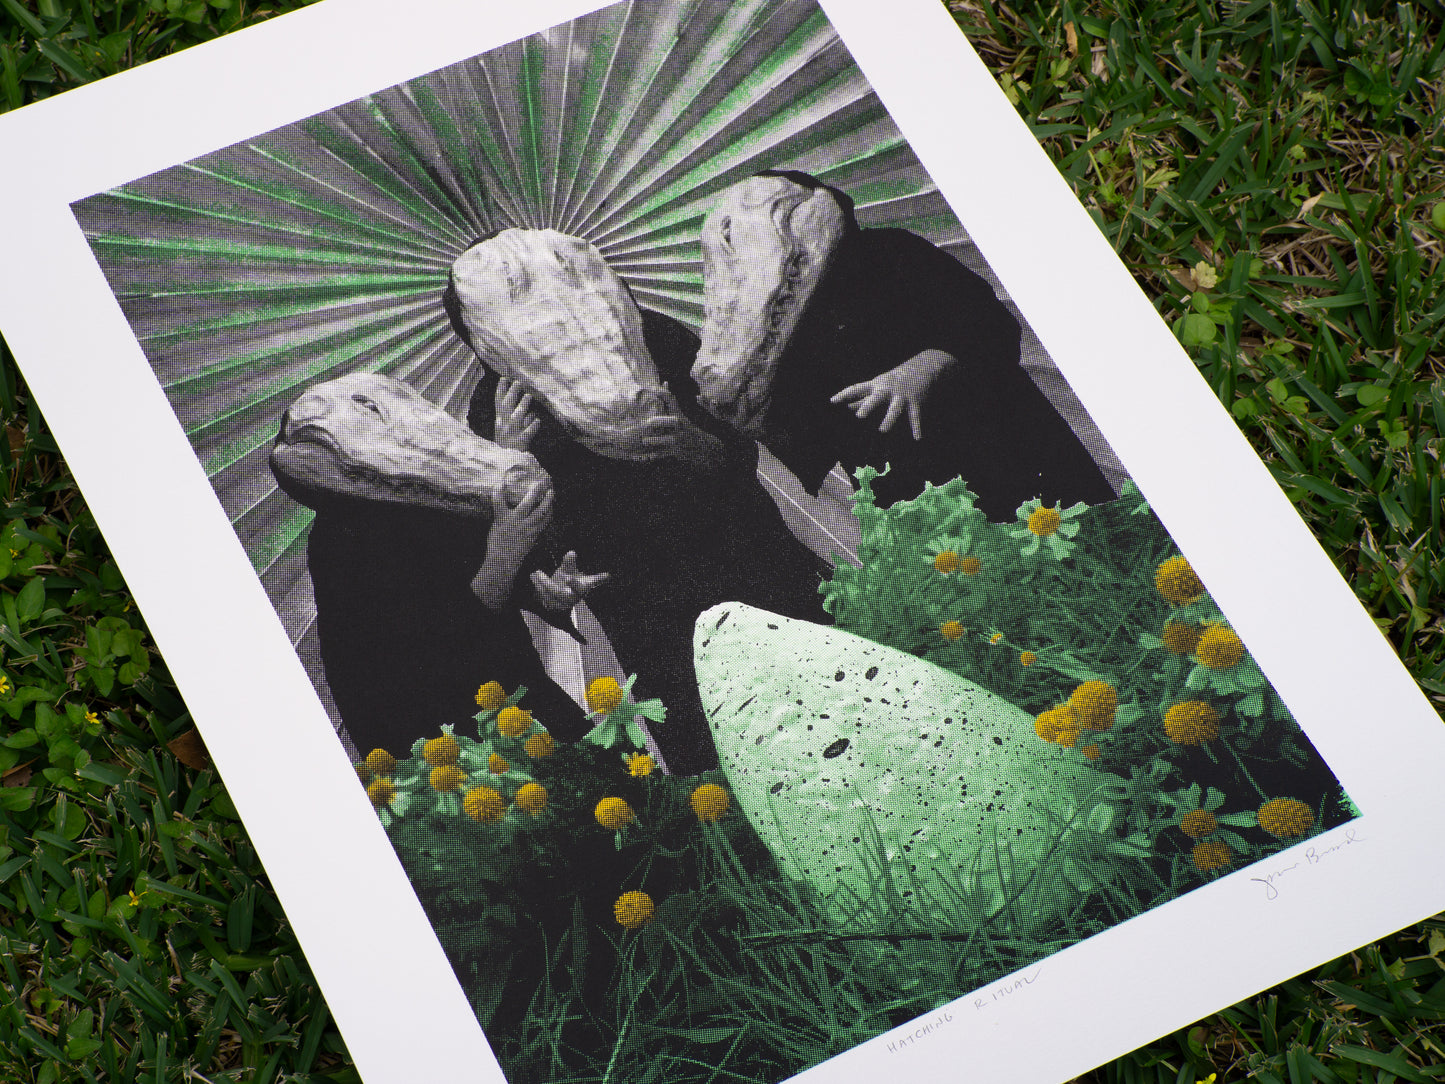 18x24 screenprinted art with three alligator humanoids standing over an egg.